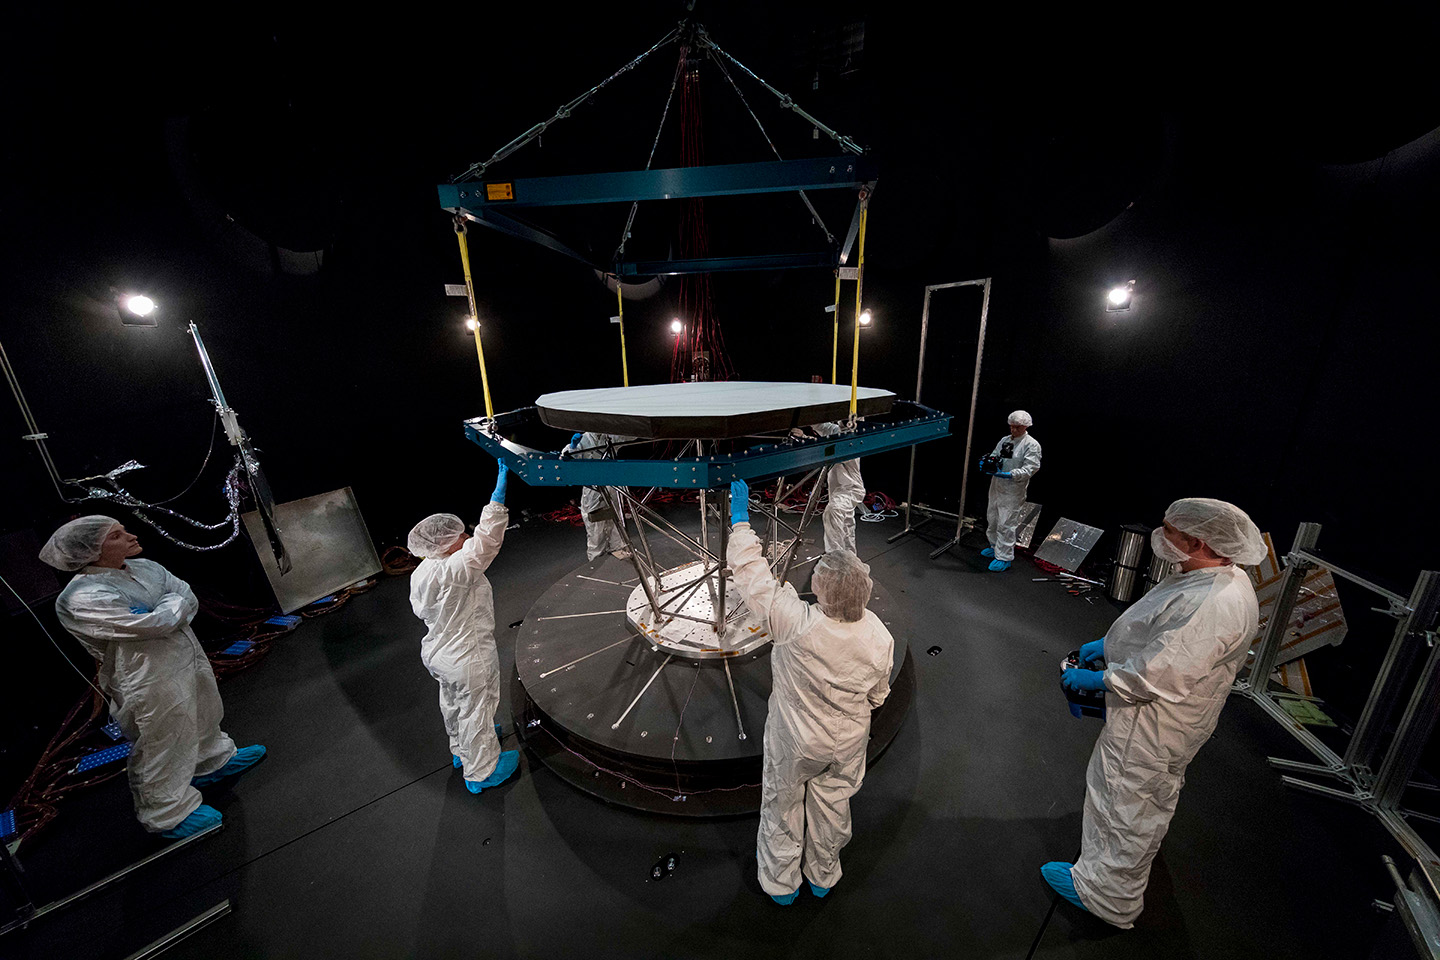 Seven people dressed in white bunny suits, hair nets, booties, and blue latex gloves stand in a dark room with lights shining on the Parker Solar Probe heat shield above them